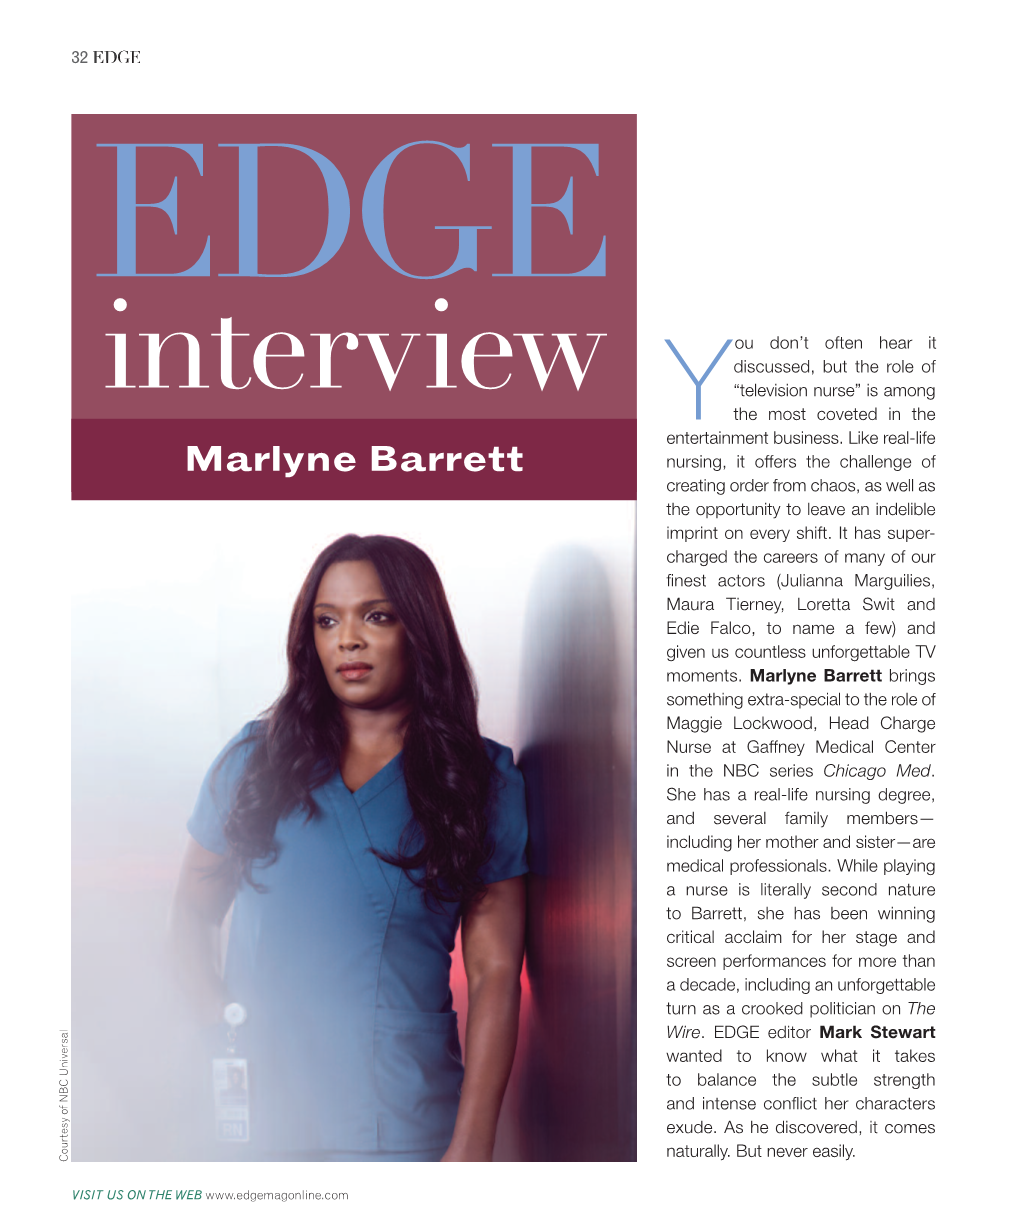 Marlyne Barrett Nursing, It Offers the Challenge of Creating Order from Chaos, As Well As the Opportunity to Leave an Indelible Imprint on Every Shift